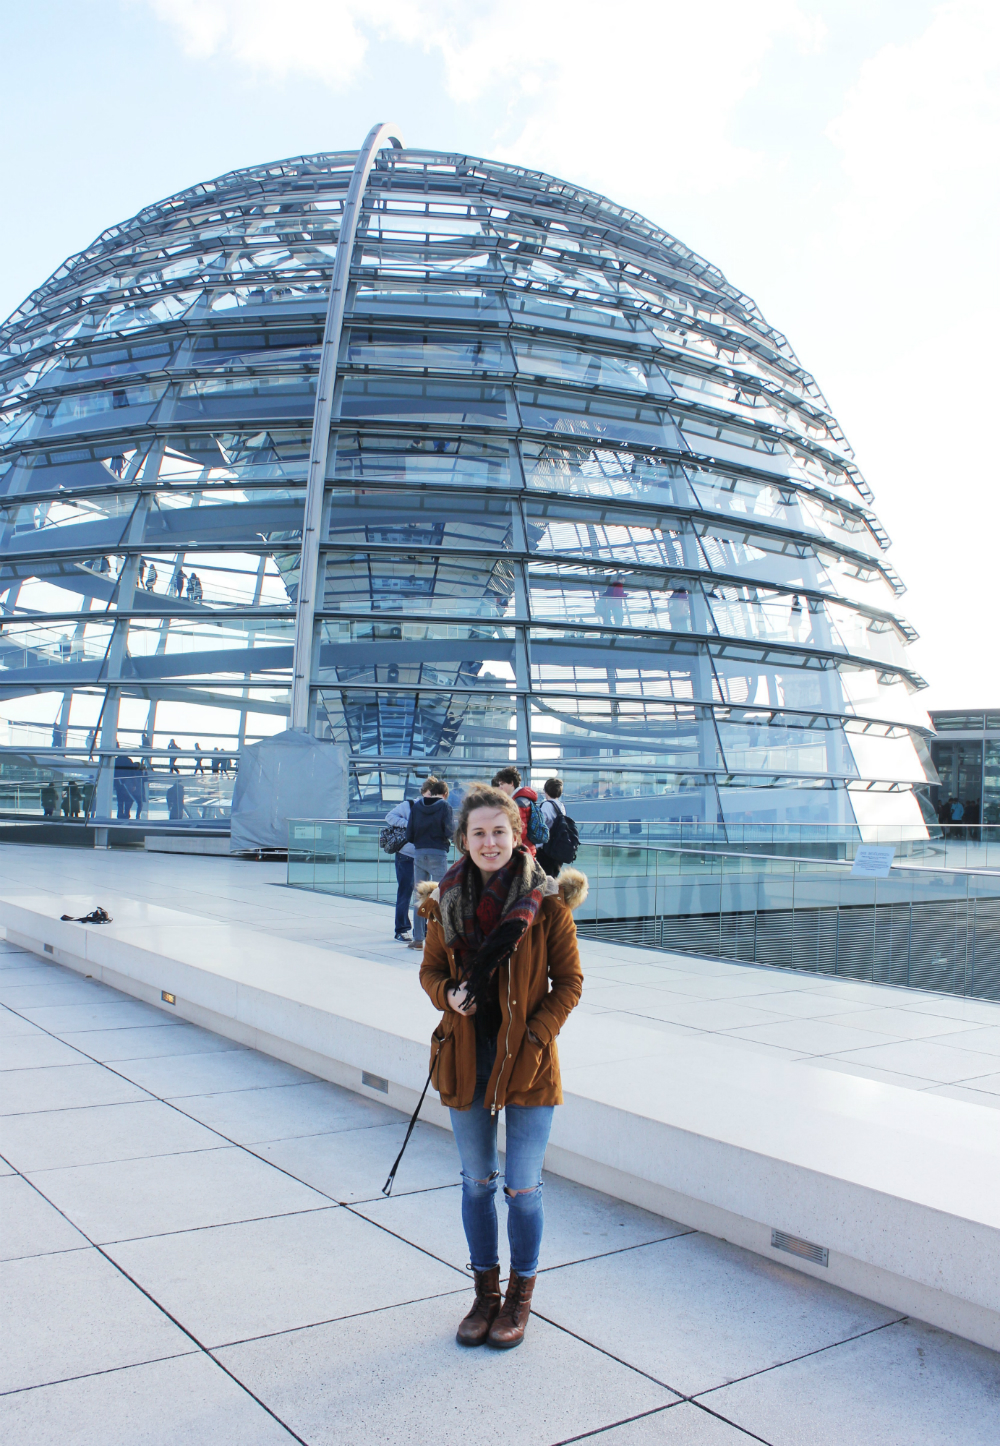 Outside the Dome at Berlin's Reichstag, the world's greenest parliament building